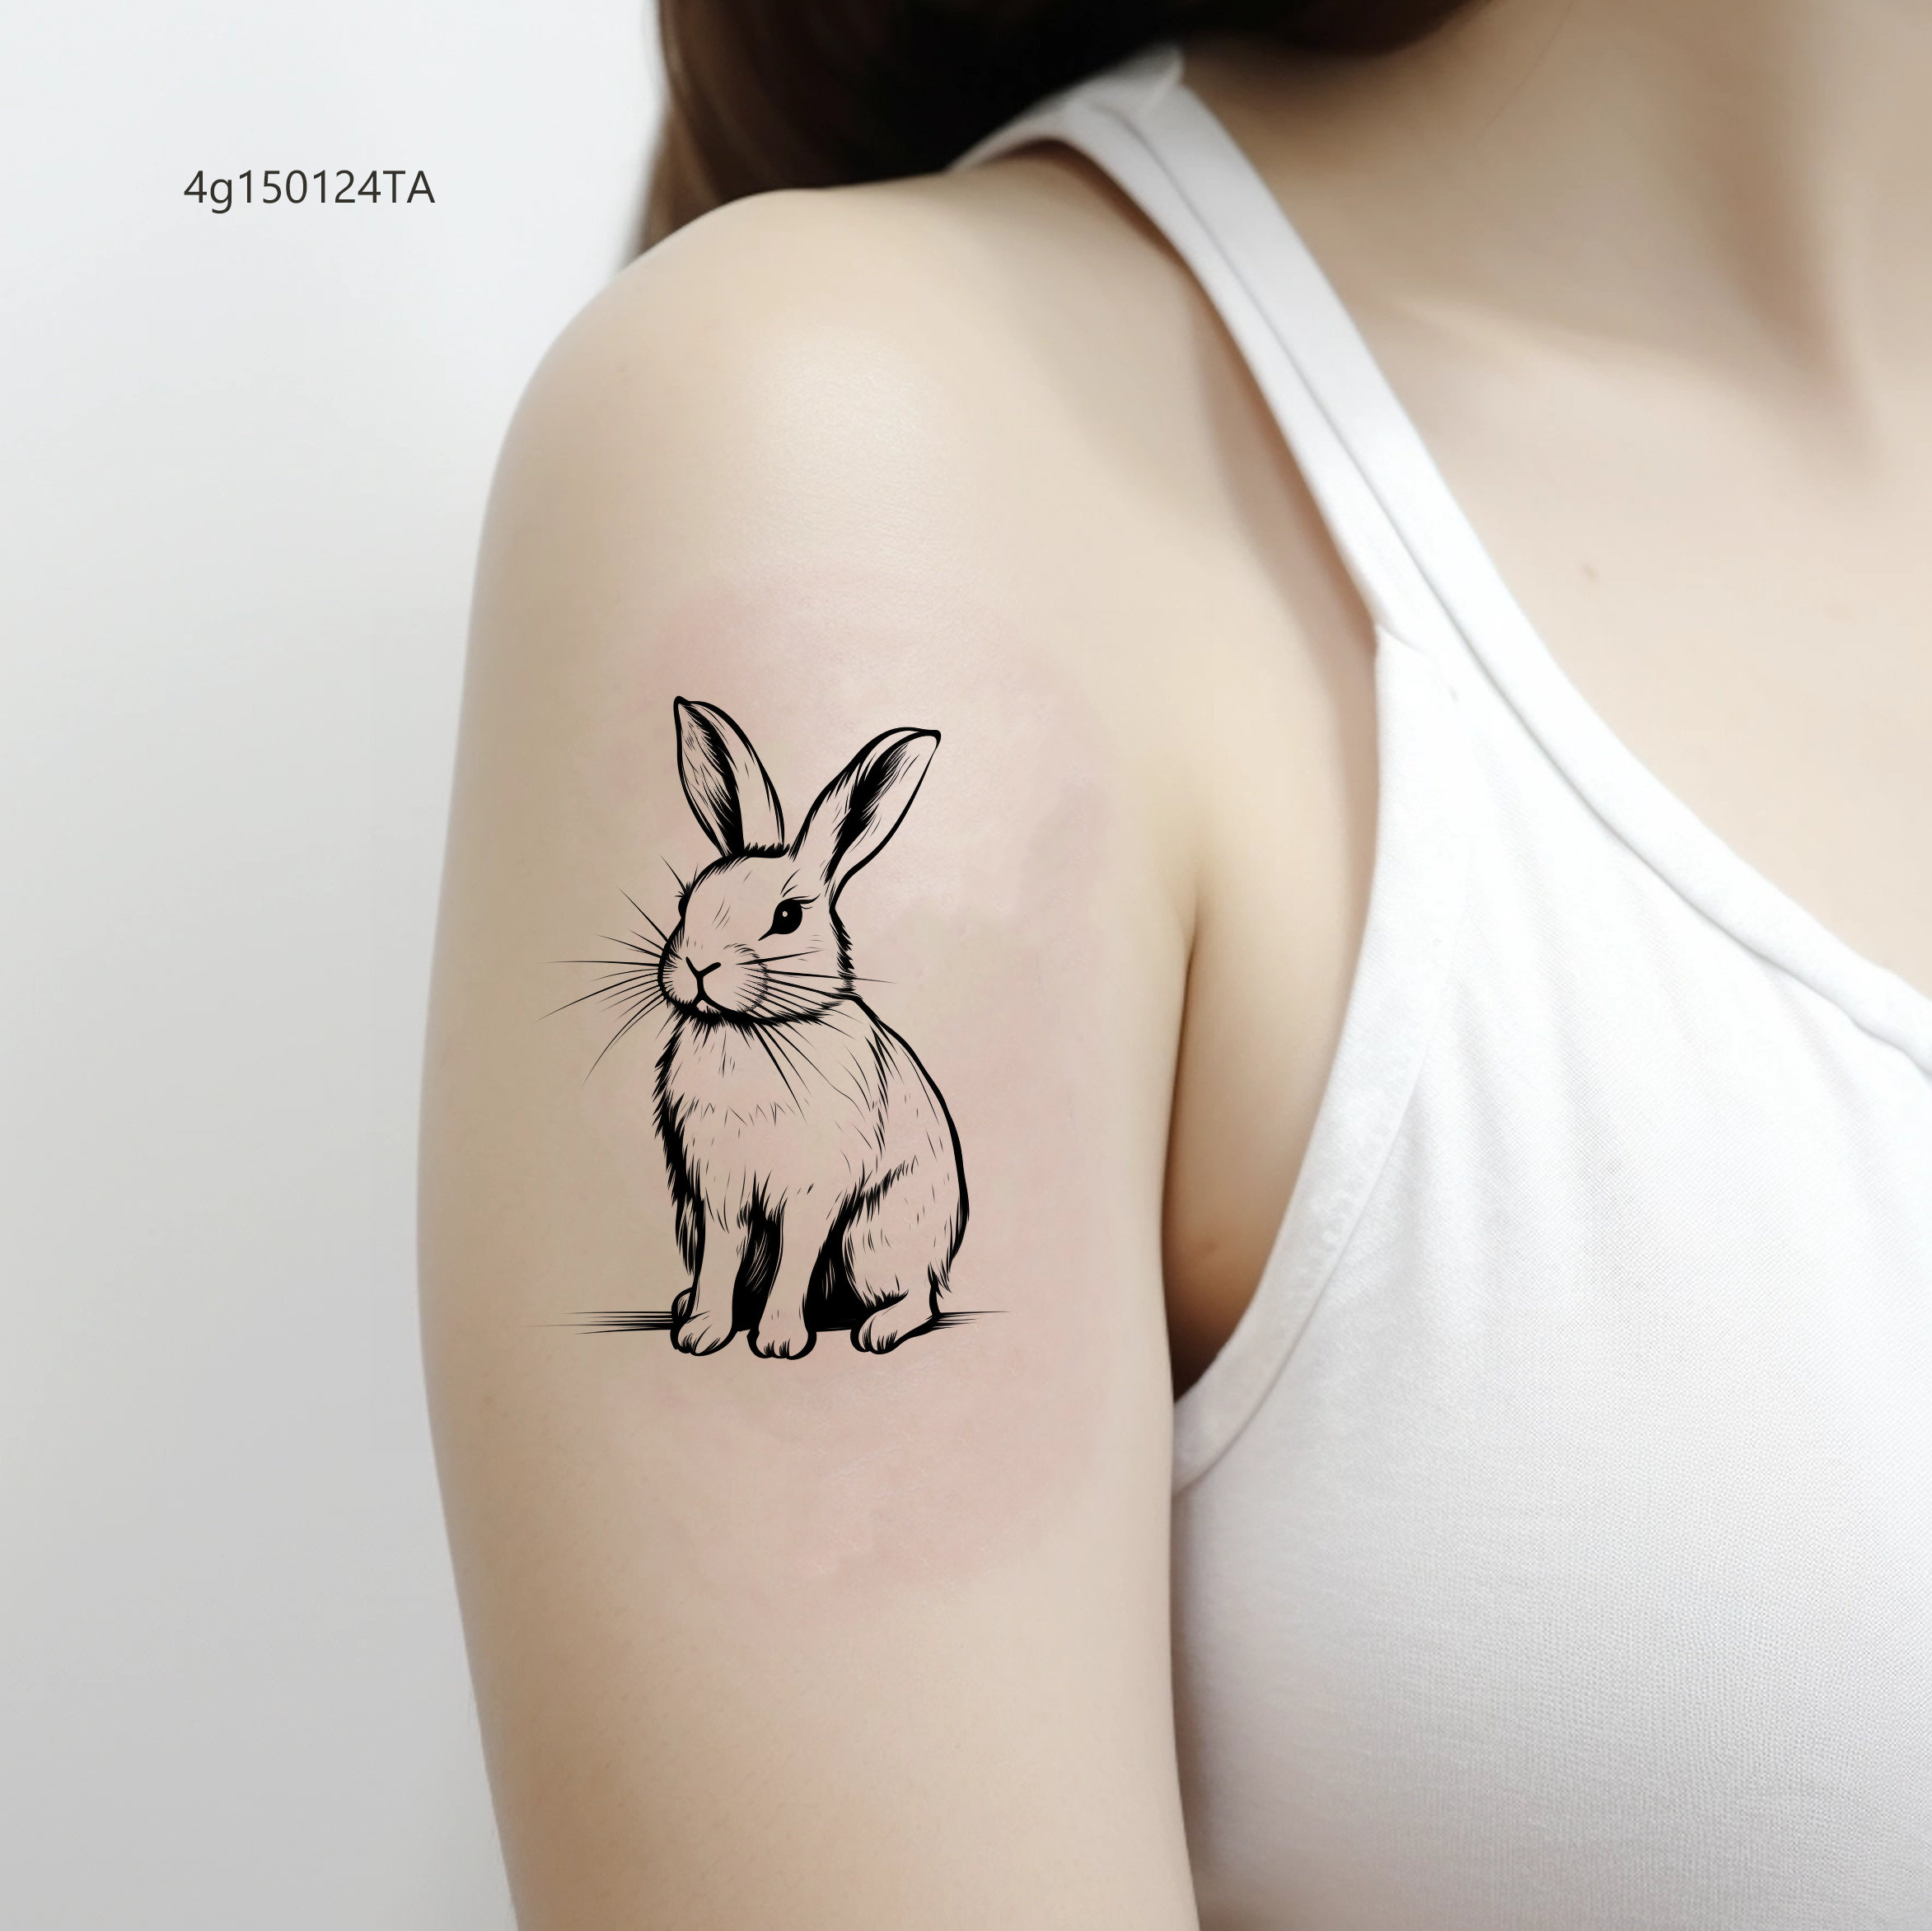 60+Rabbit Tattoo Ideas for Your Inspiration | Art and Design